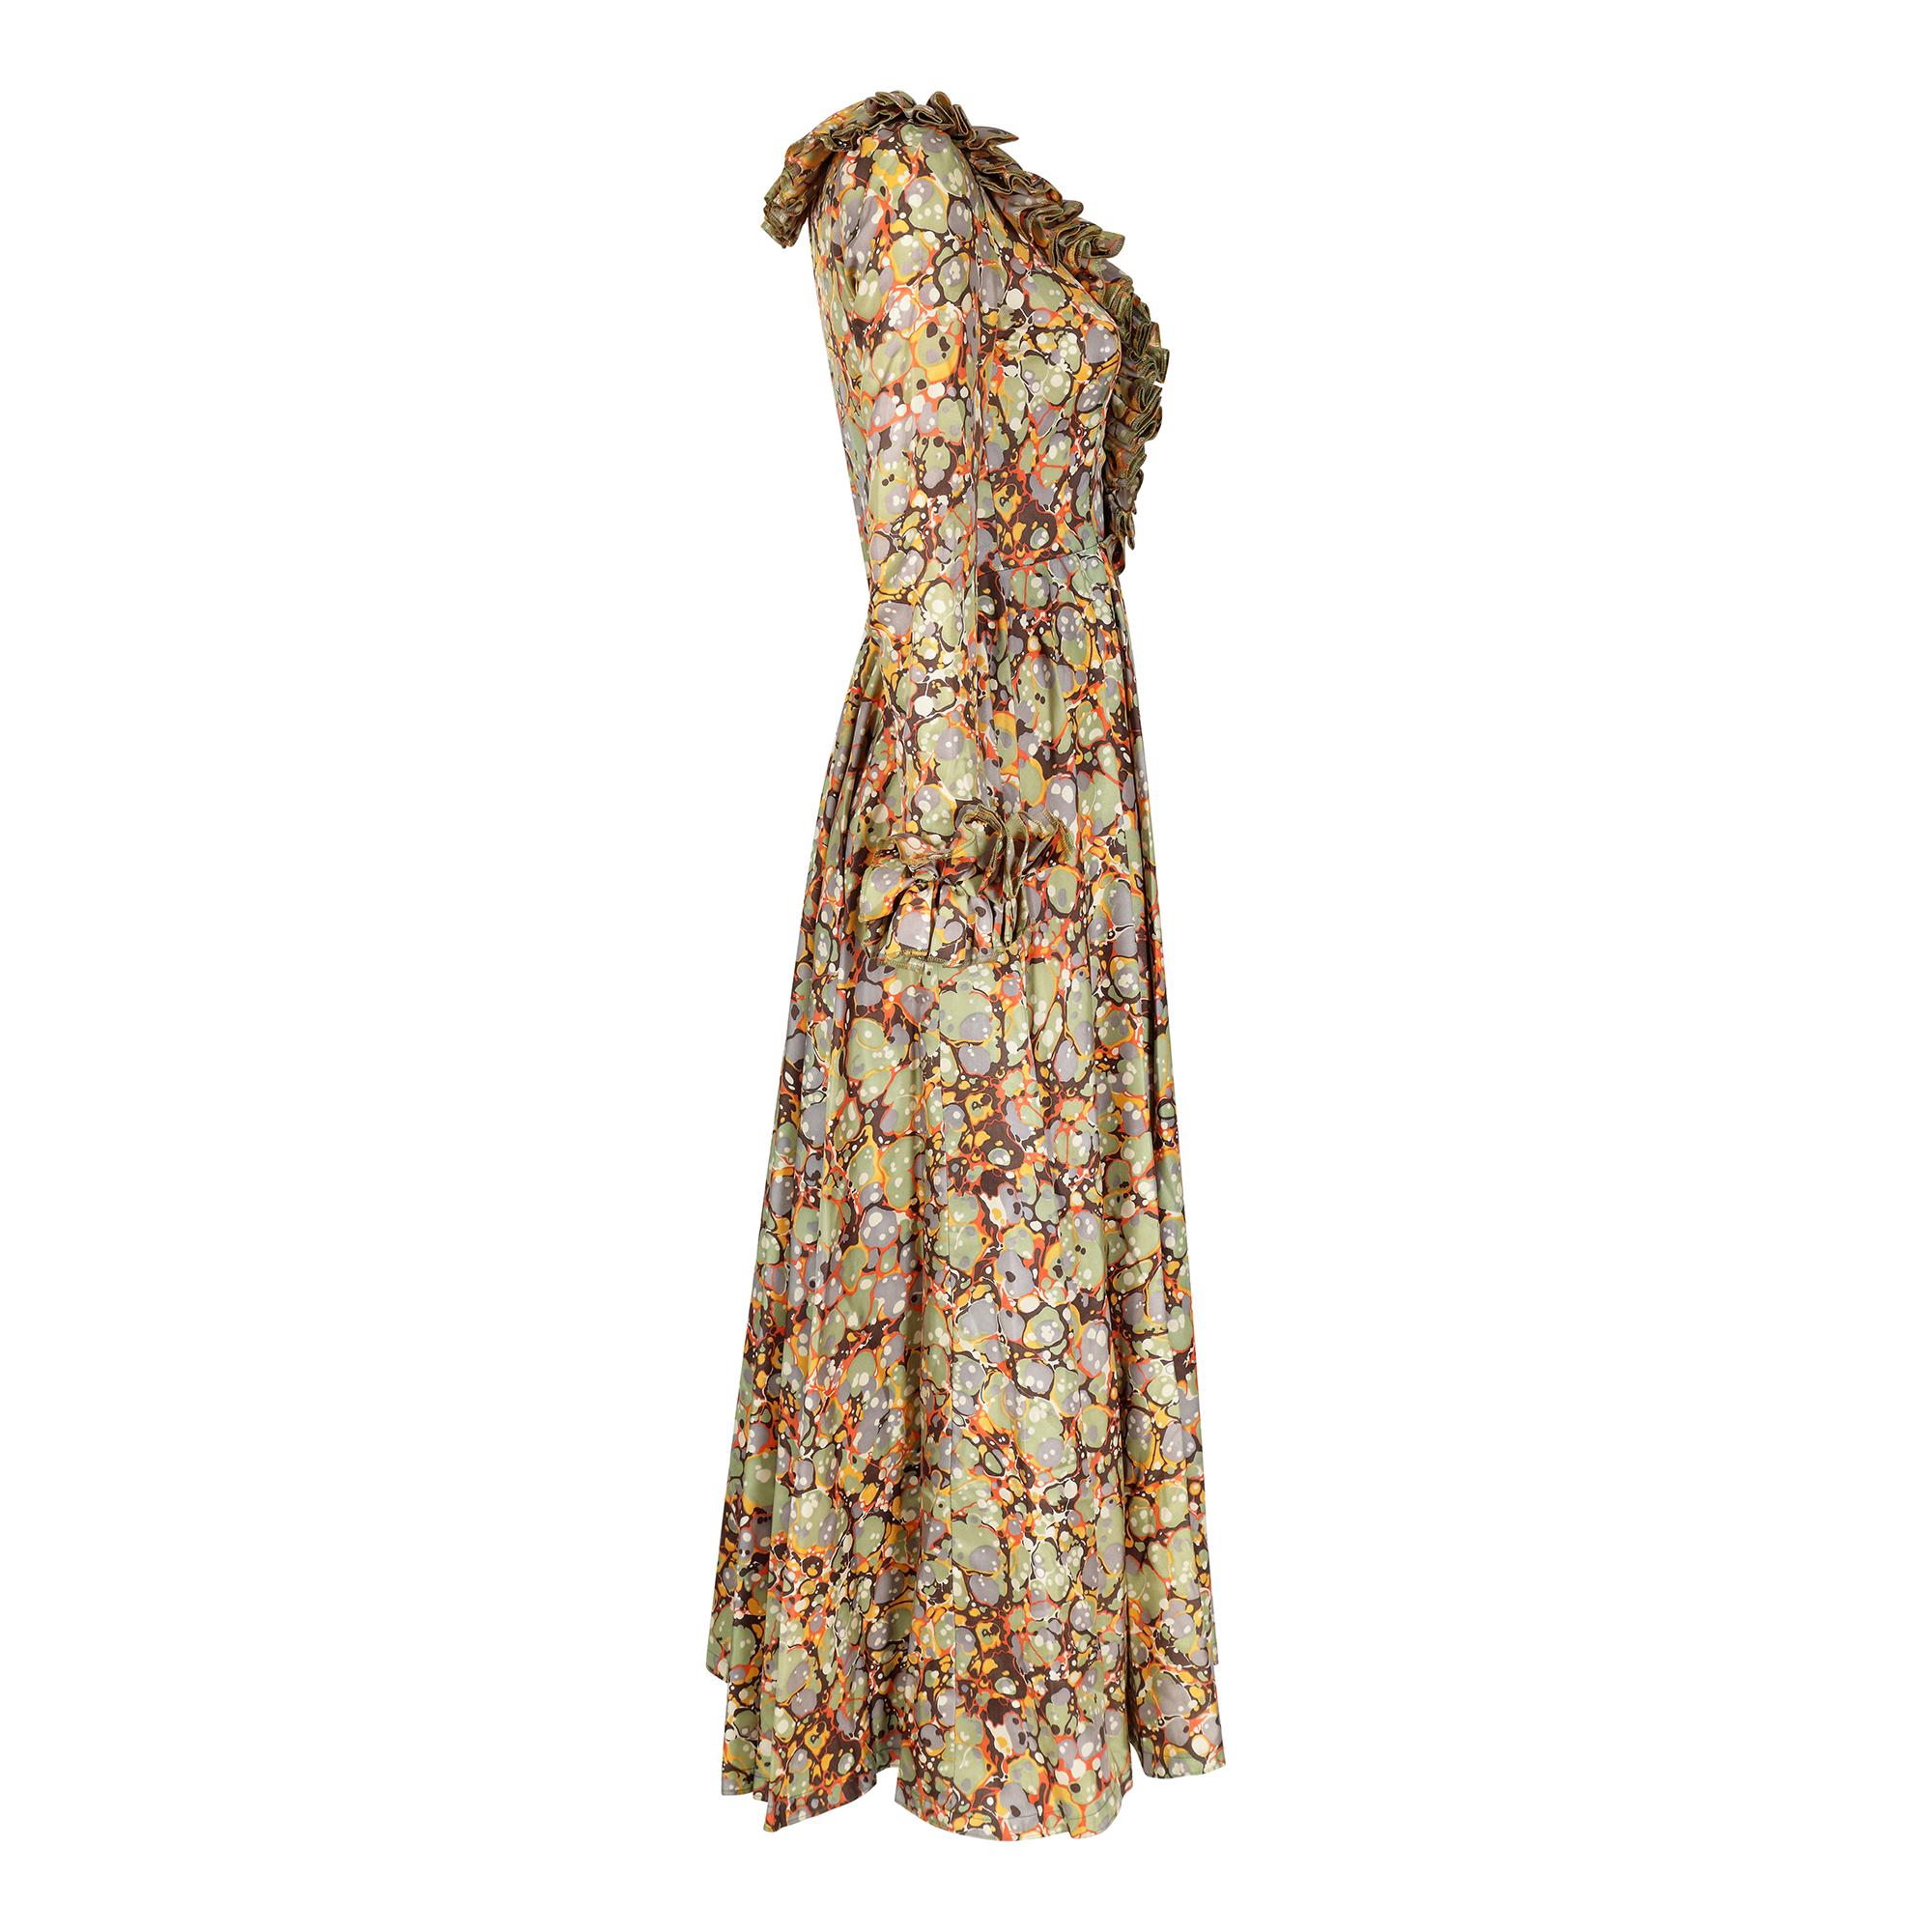 Documented 1970s Jean Varon Psychedelic Bubble Print Maxi Dress at 1stDibs